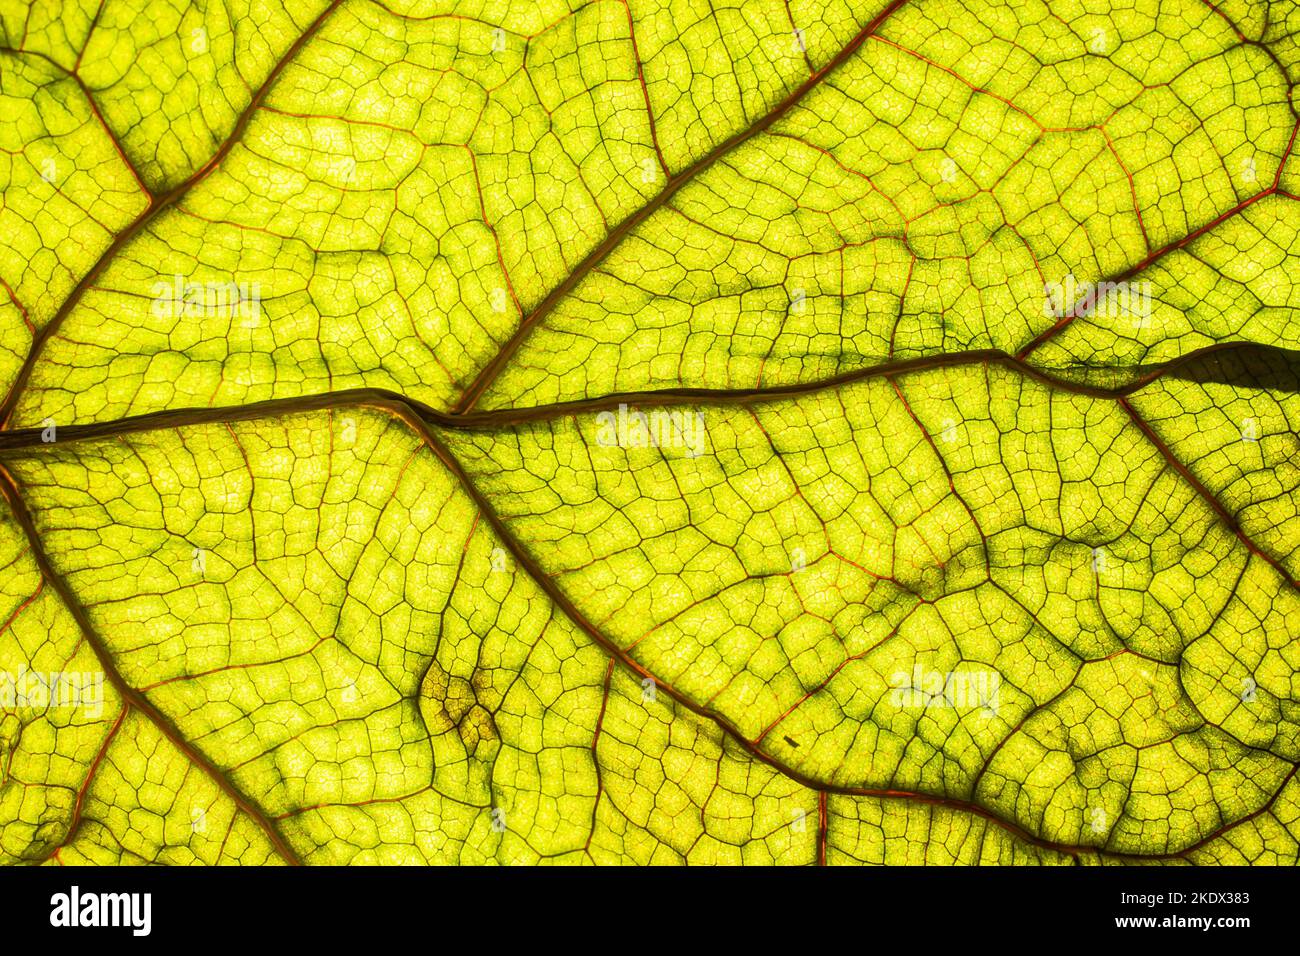 Close up detail of a beautiful backlit green leaf with veins and cellular structure patterns. Autumn background Stock Photo